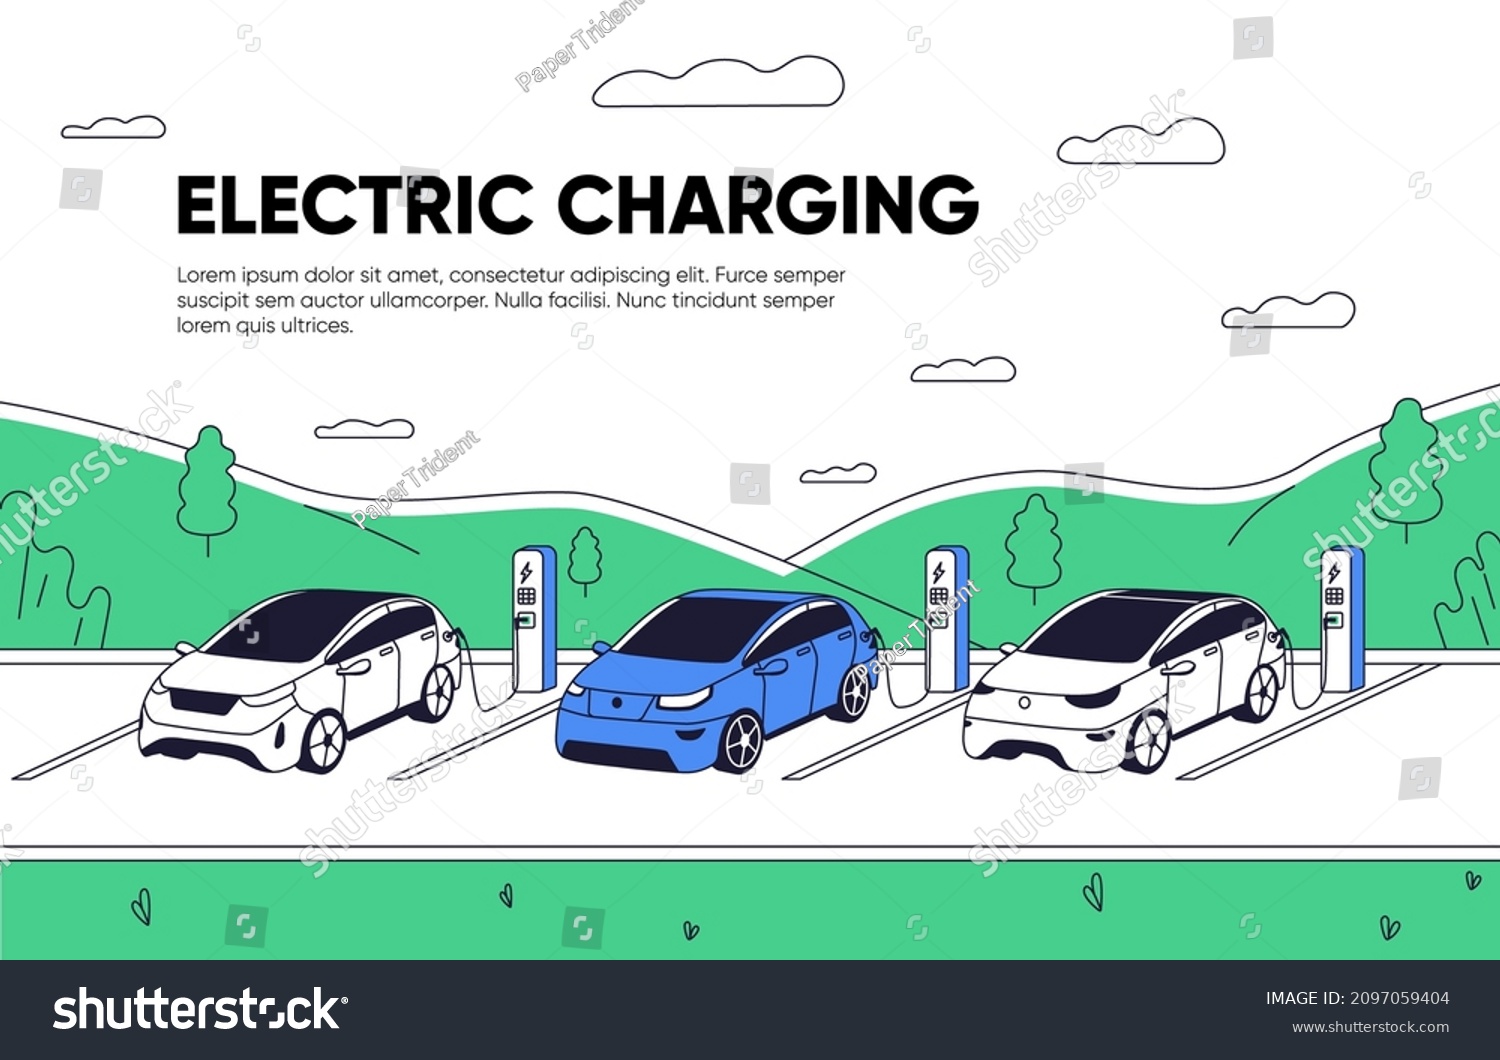 SVG of Landing page template for charging station. Electric cars at EV charger, web-site background. Eco electro vehicles recharging at EVSE, website layout. Colored flat graphic vector illustration svg